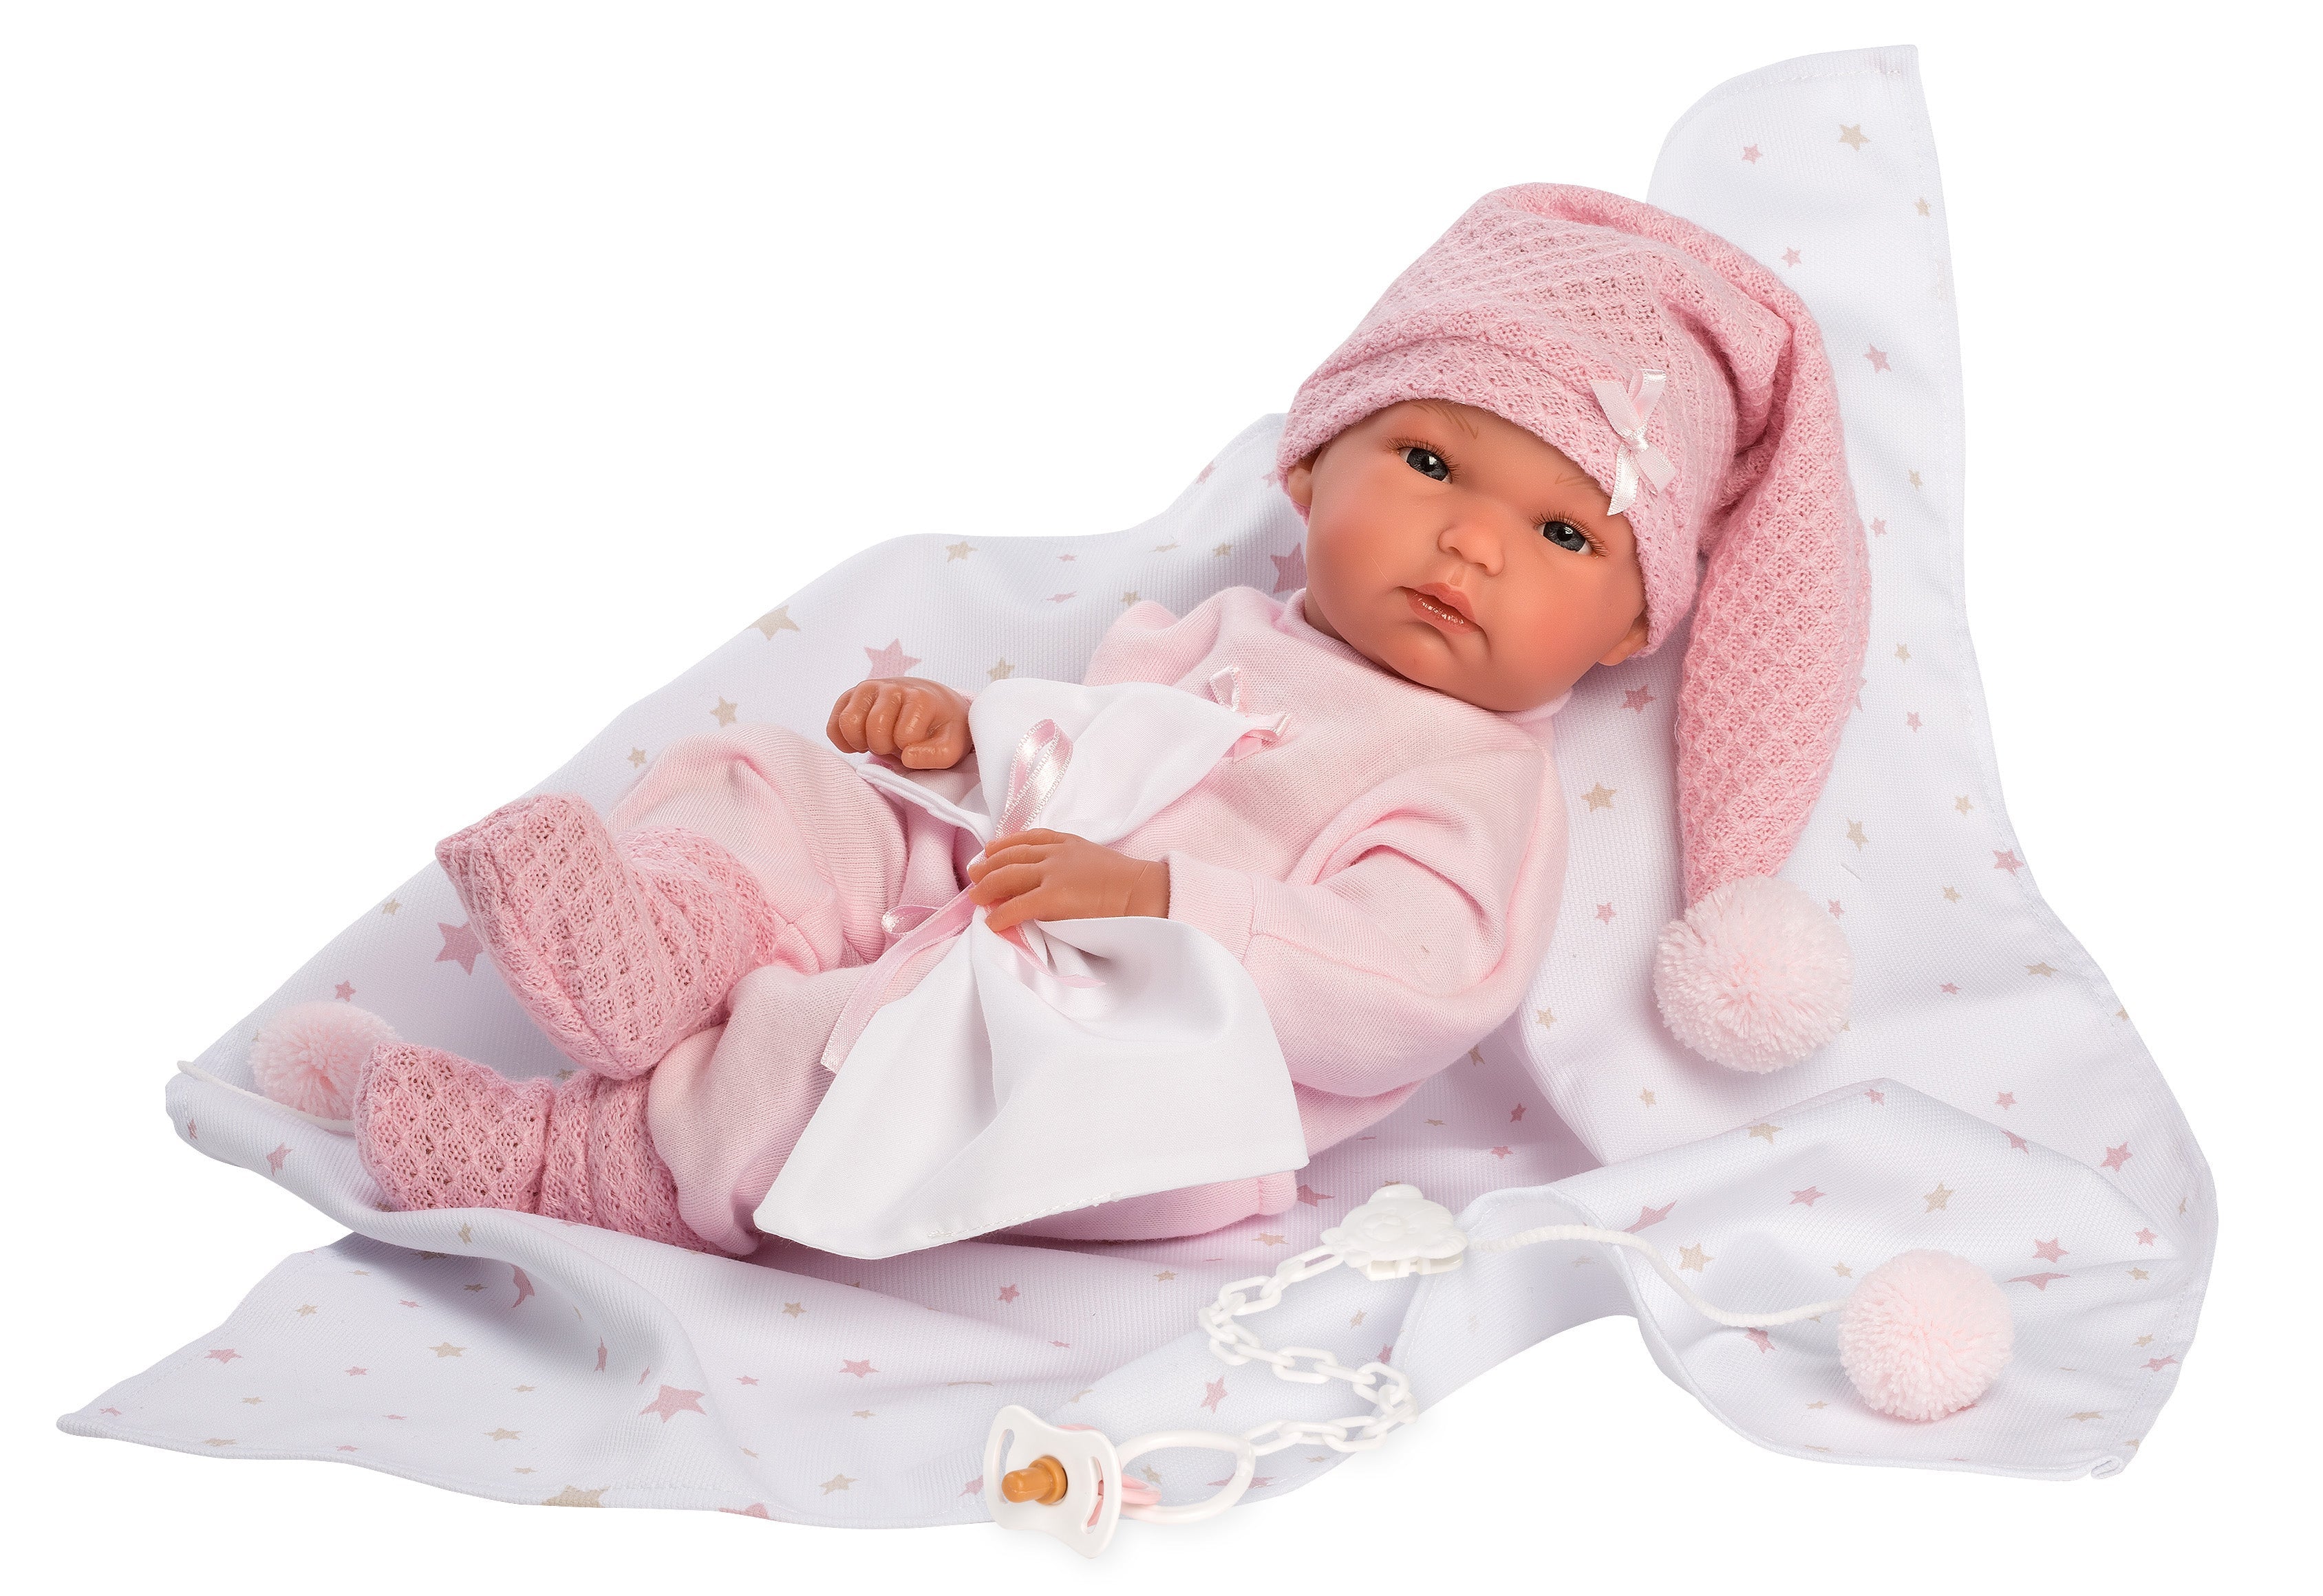 Llorens 13.8" Anatomically-correct Baby Doll Kaylee with Blanket and Stocking Cap Dolls